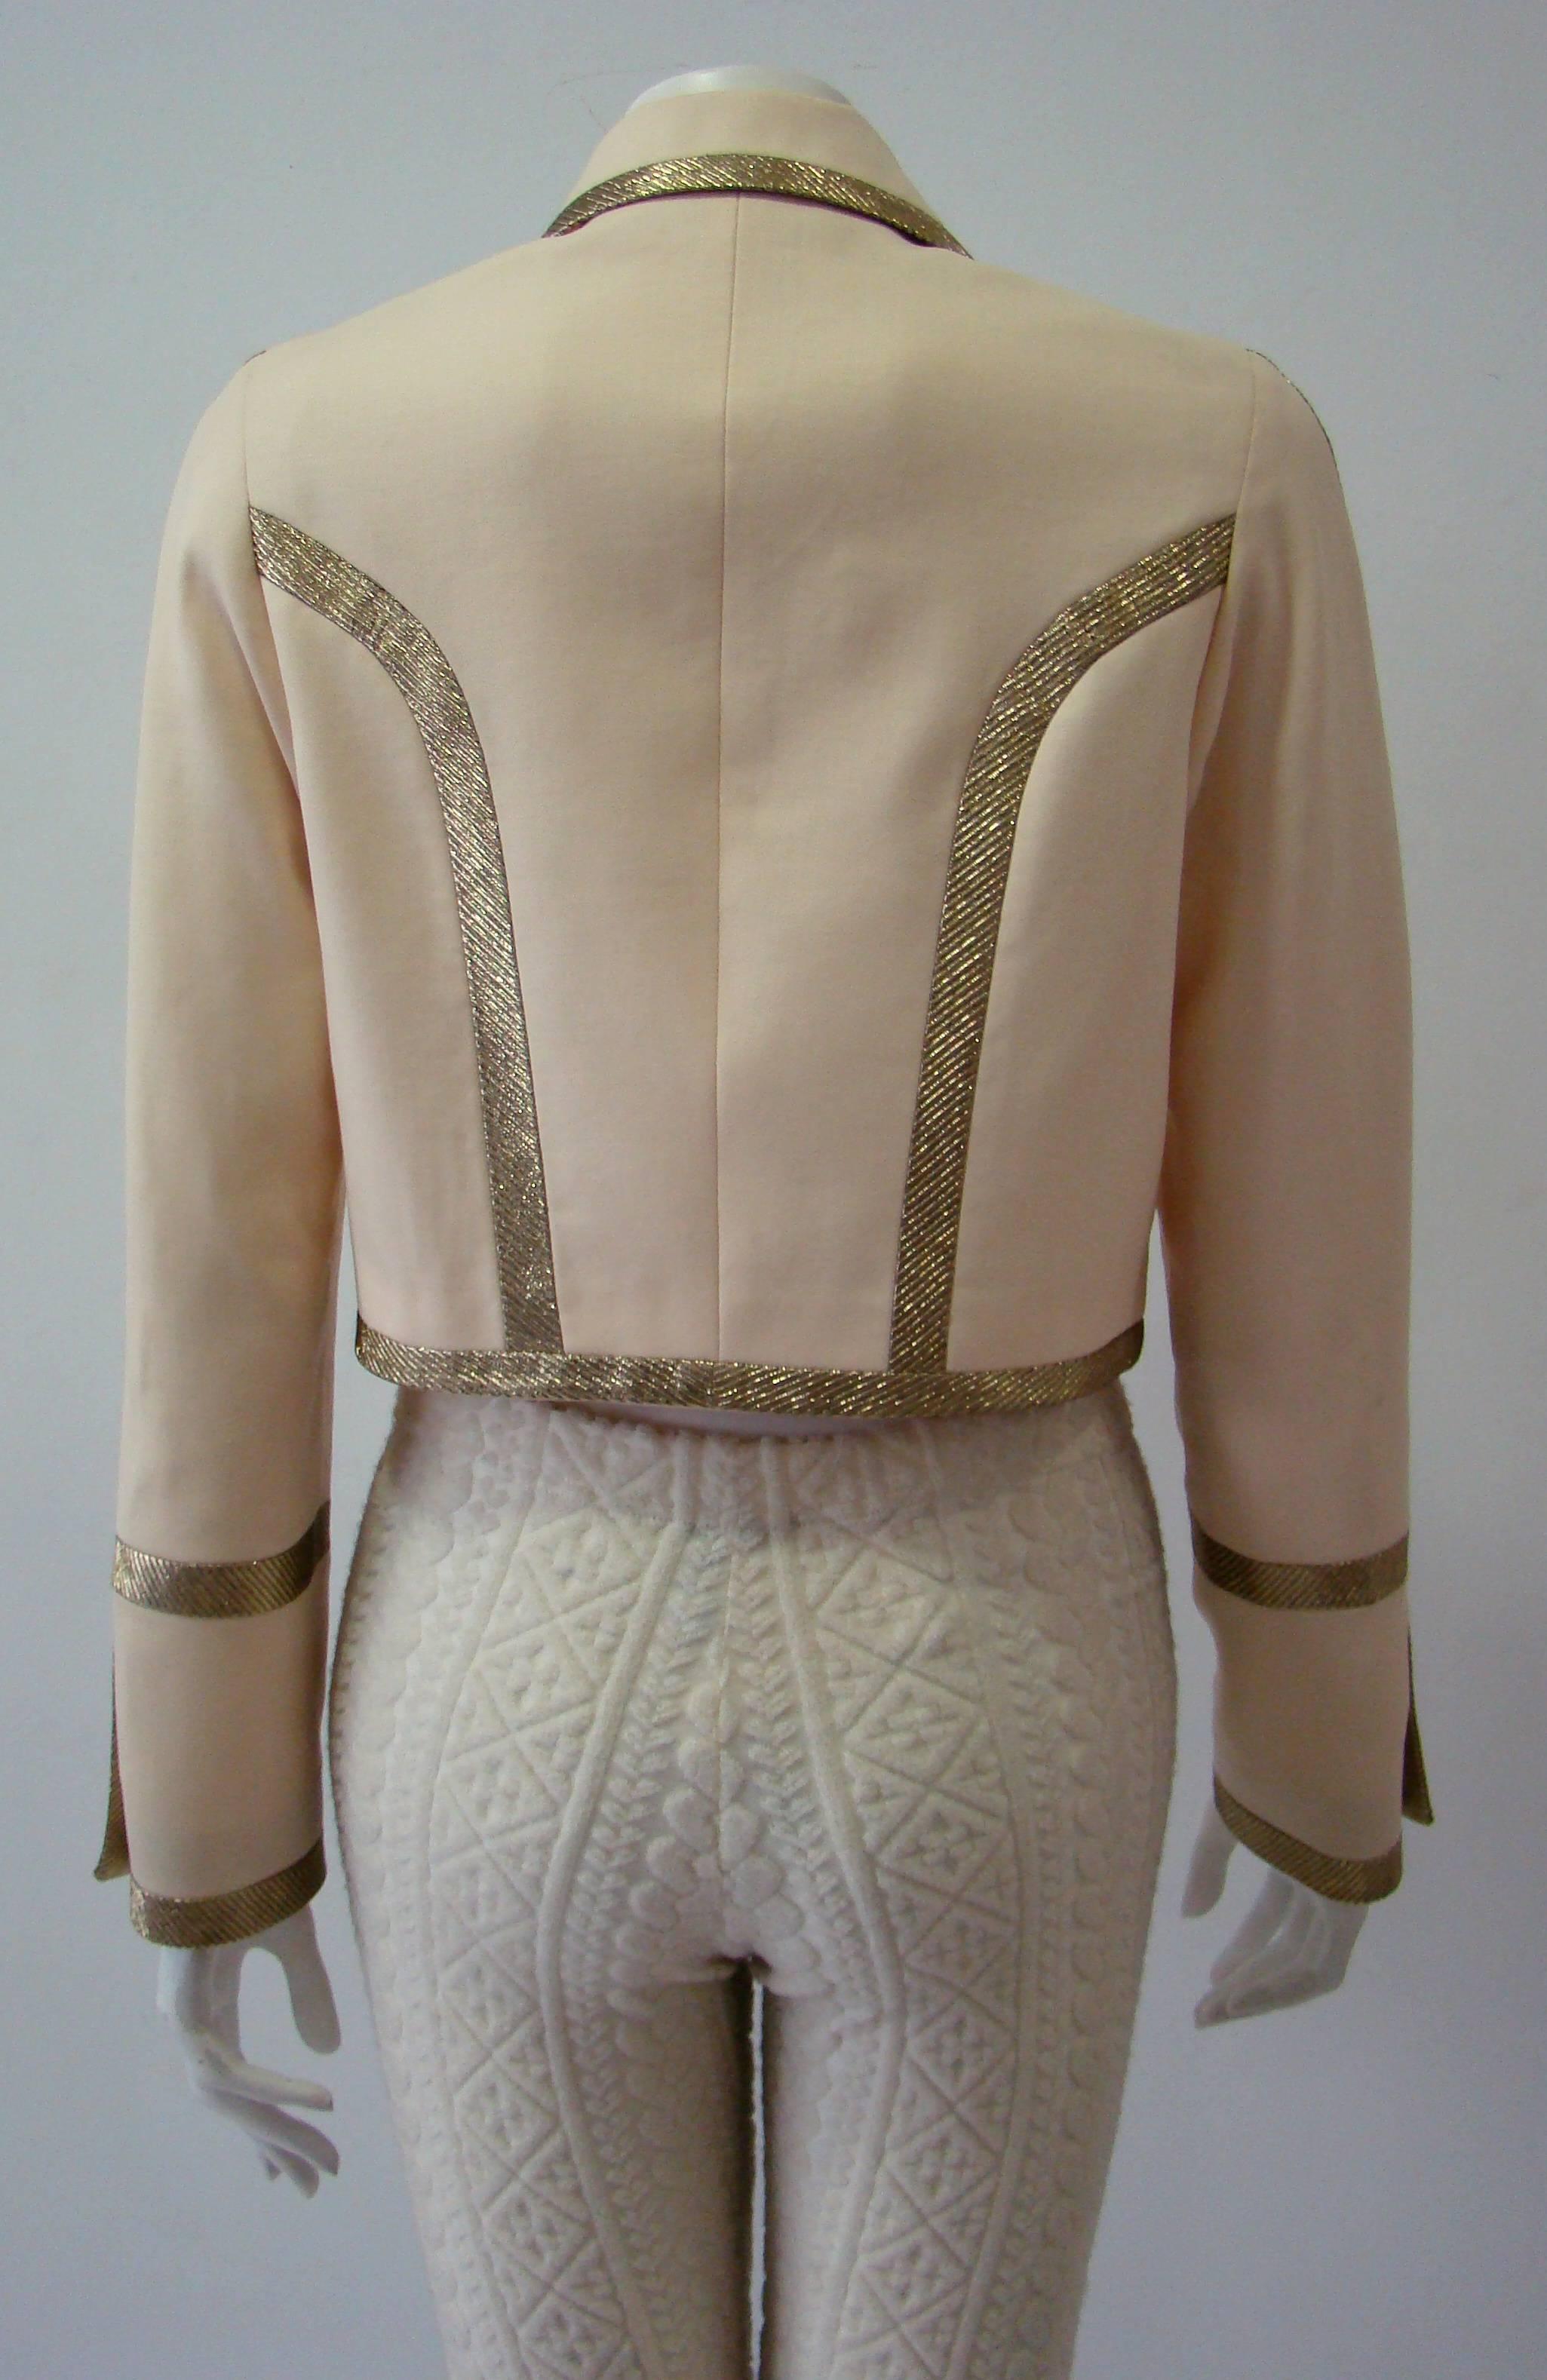 Gianni Versace Couture Cropped Gold Metallic Braid Jacket Spring 1992 For Sale 3